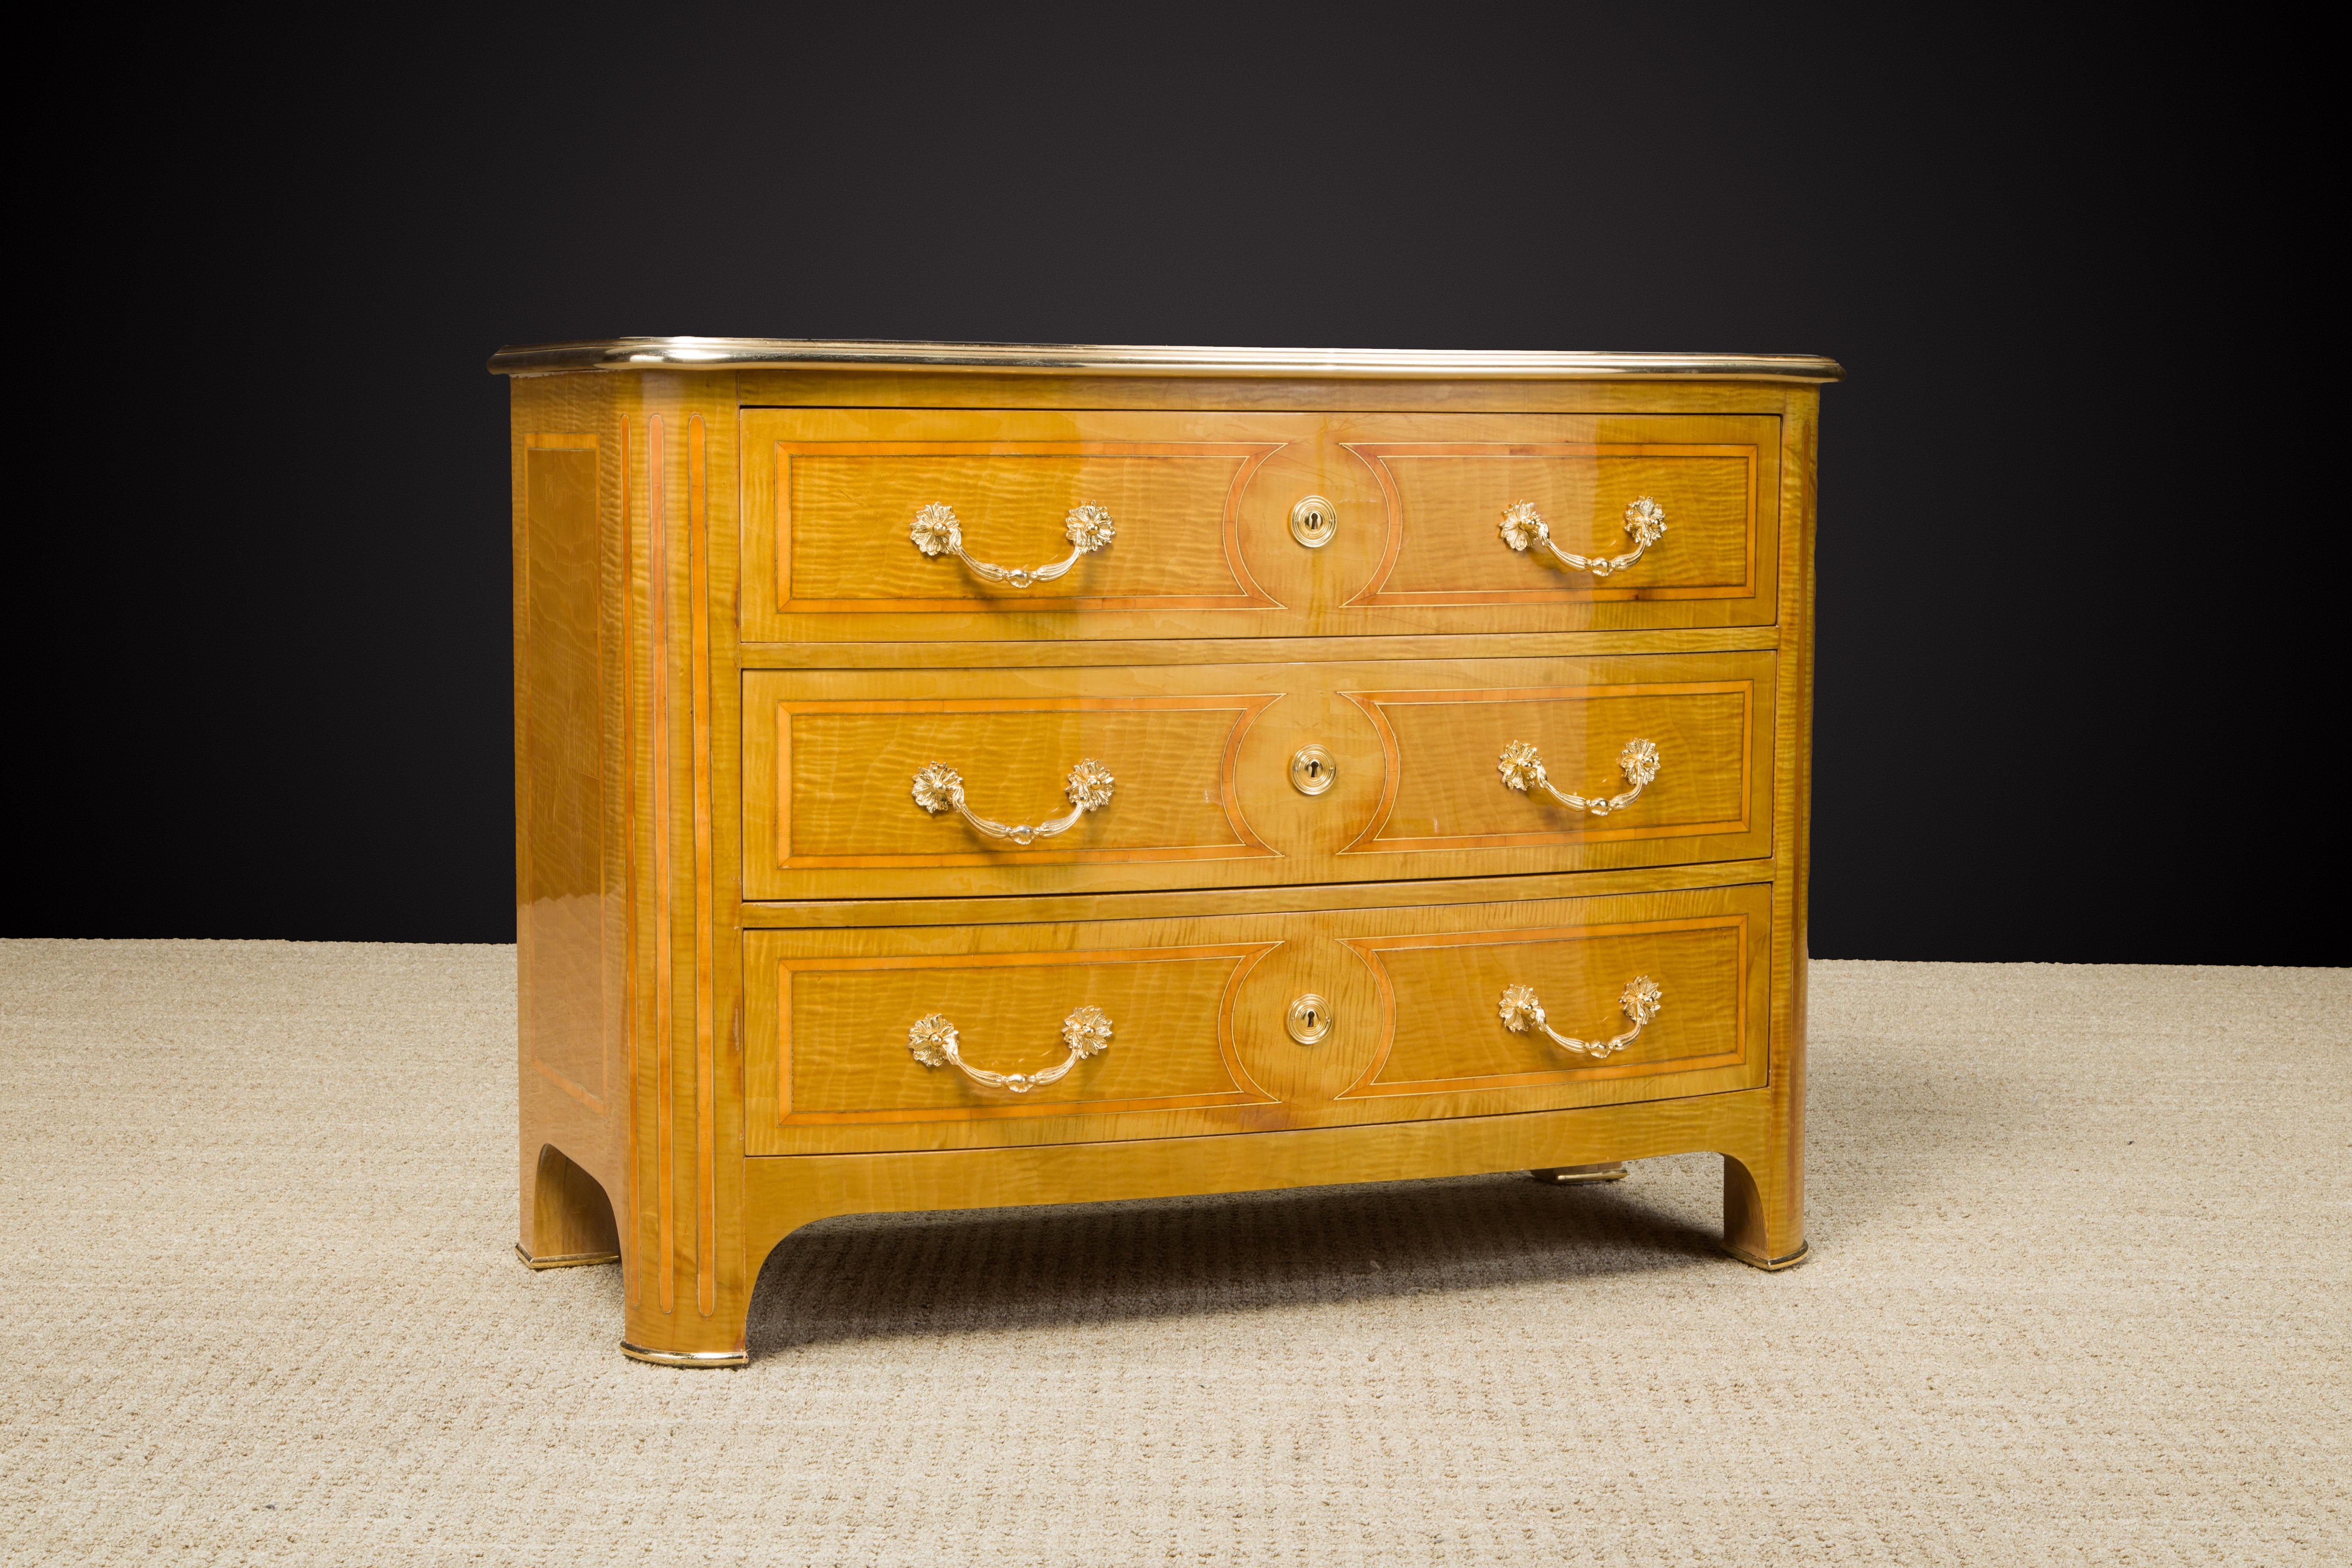 Fine Maison Jansen Brass Inlay and Exotic Marquetry Regency Commode, c. 1960s For Sale 1